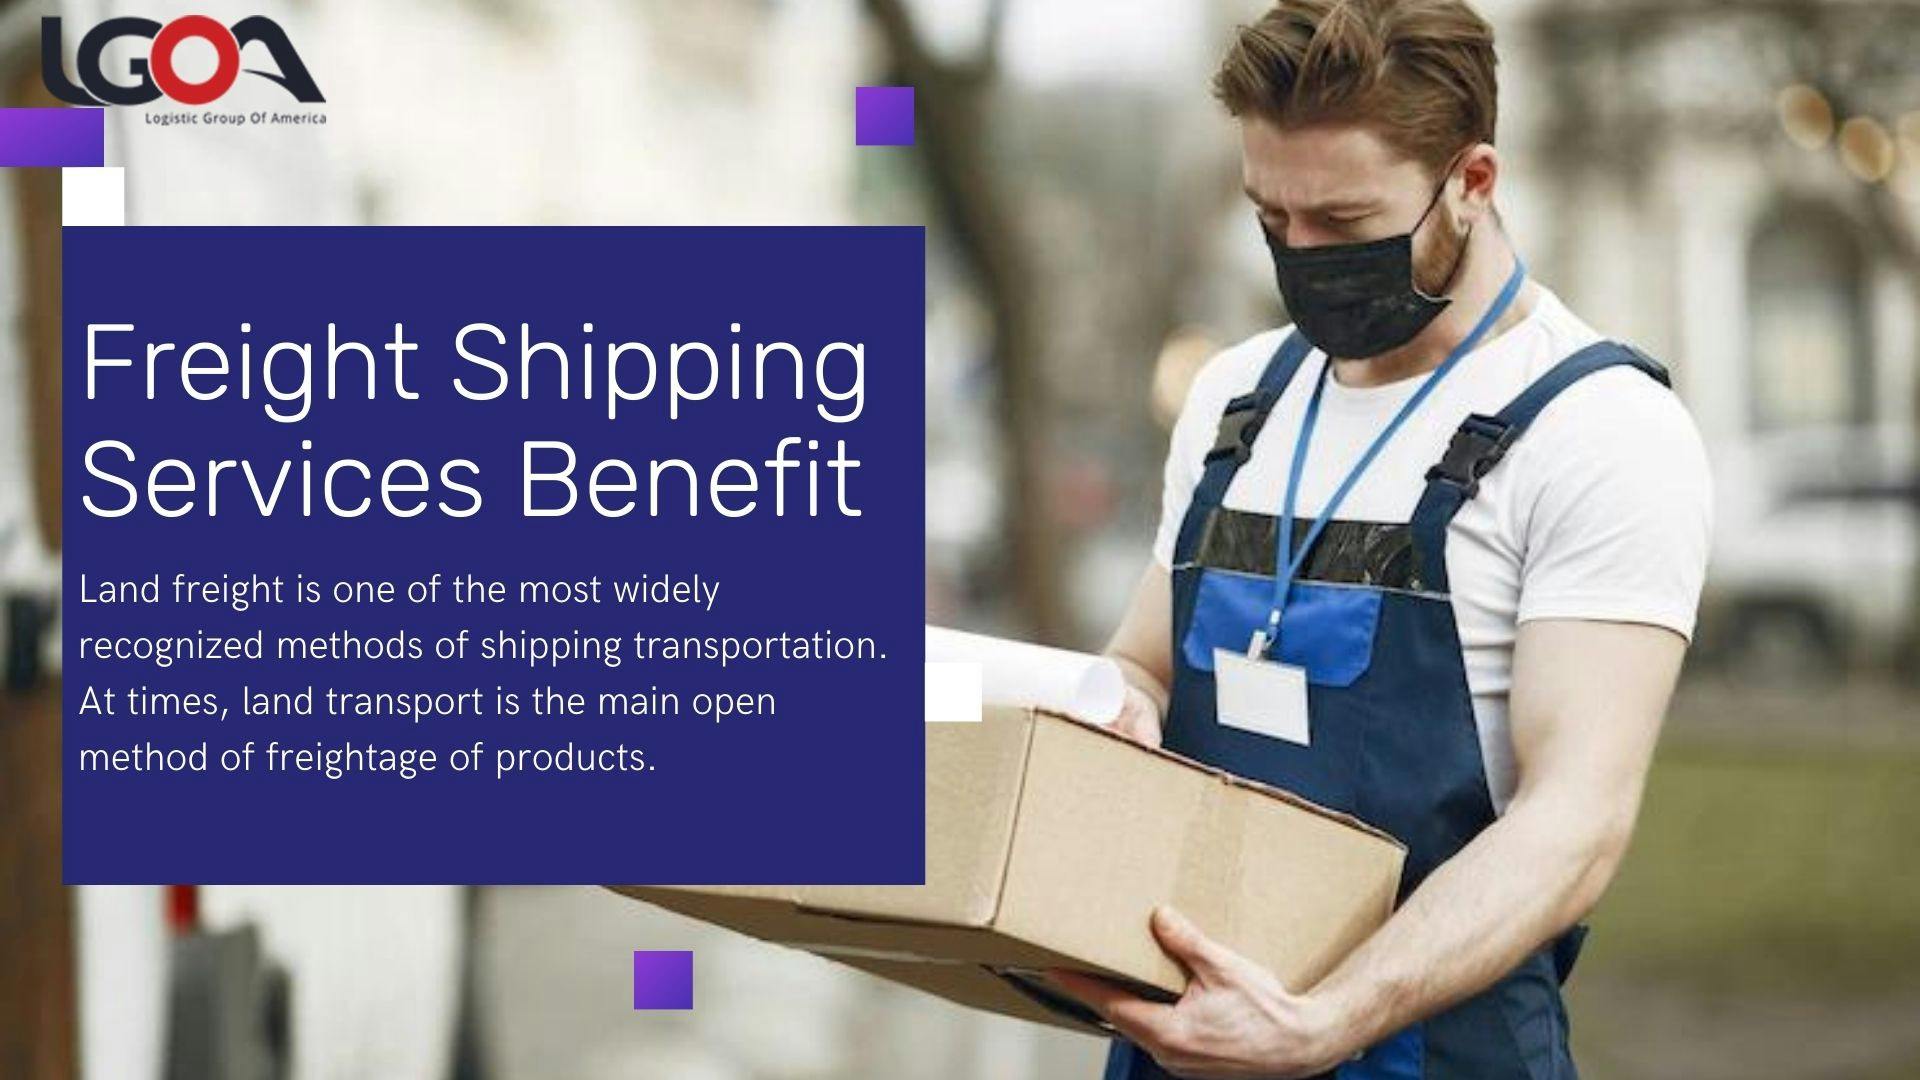 Freight Shipping Services Benefitsdsdsds.jpg